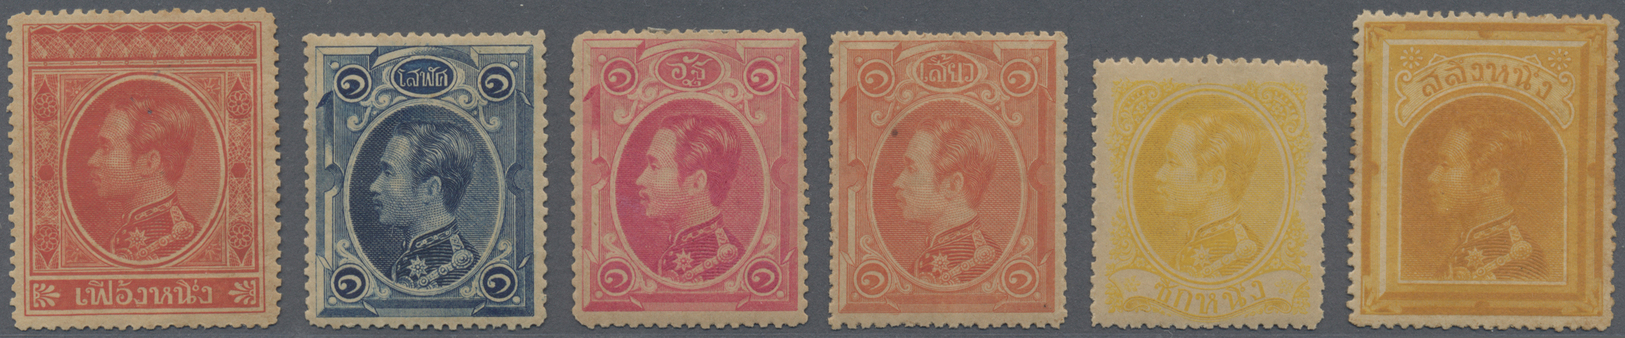 */** Thailand: 1883 Unissued 1 Fuang Deep Vermilion, Mint Never Hinged, Toned And Slightly Creased Gum, Fine, Accompanie - Thailand